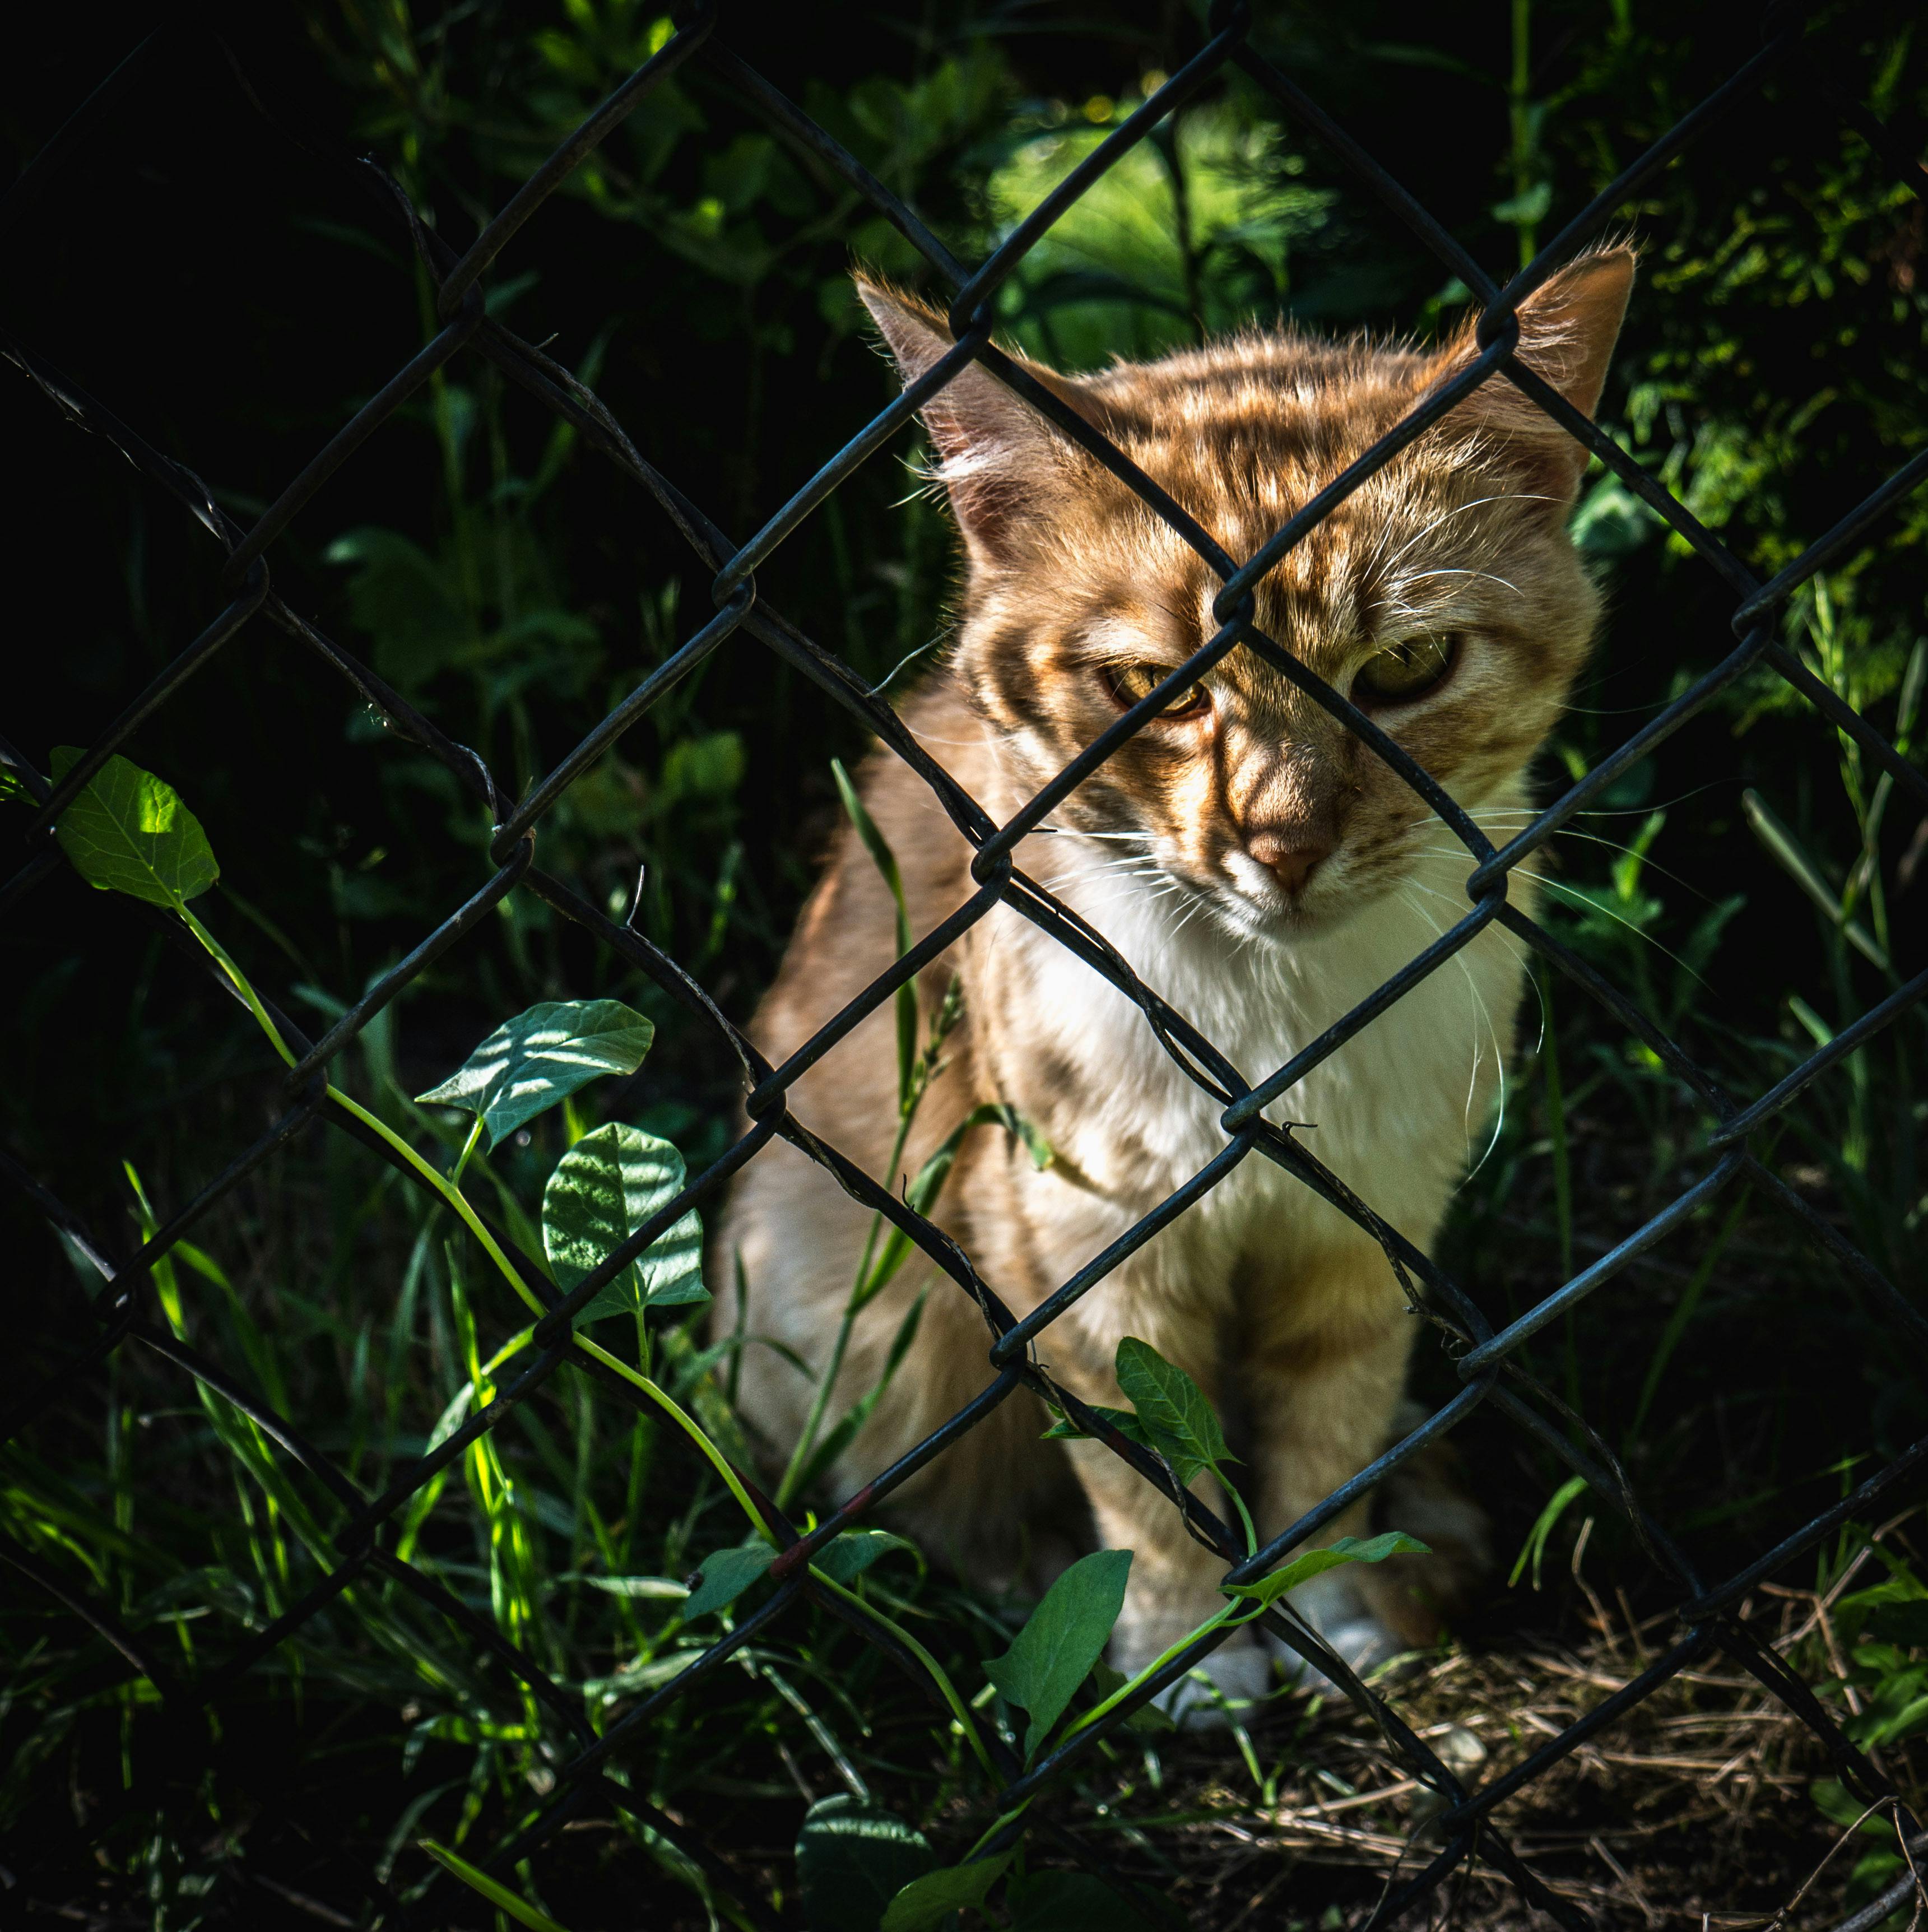 a cat sitting near the chain link fence